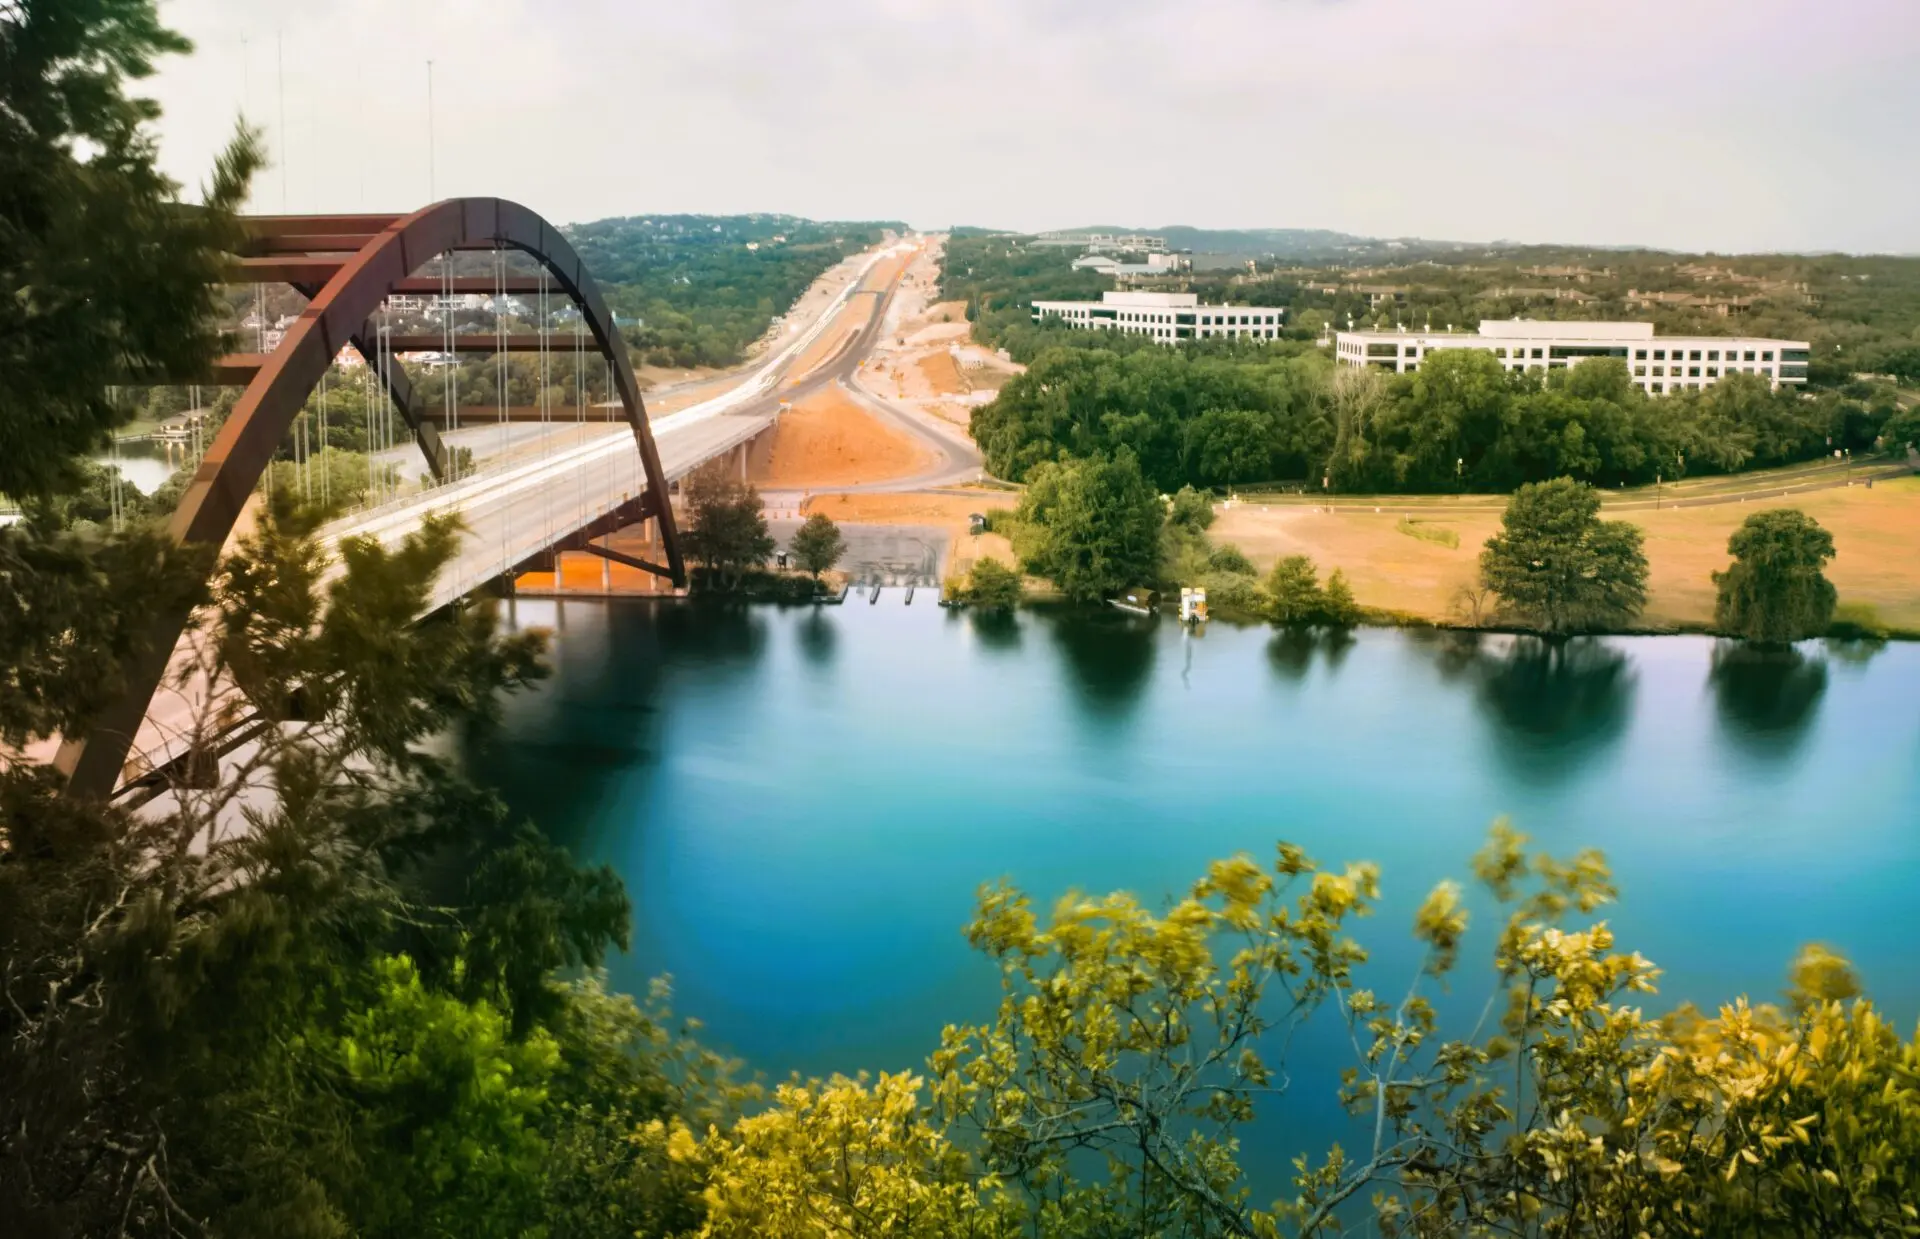 360 Bridge in Austin, Texas, surrounded by vacant land for development